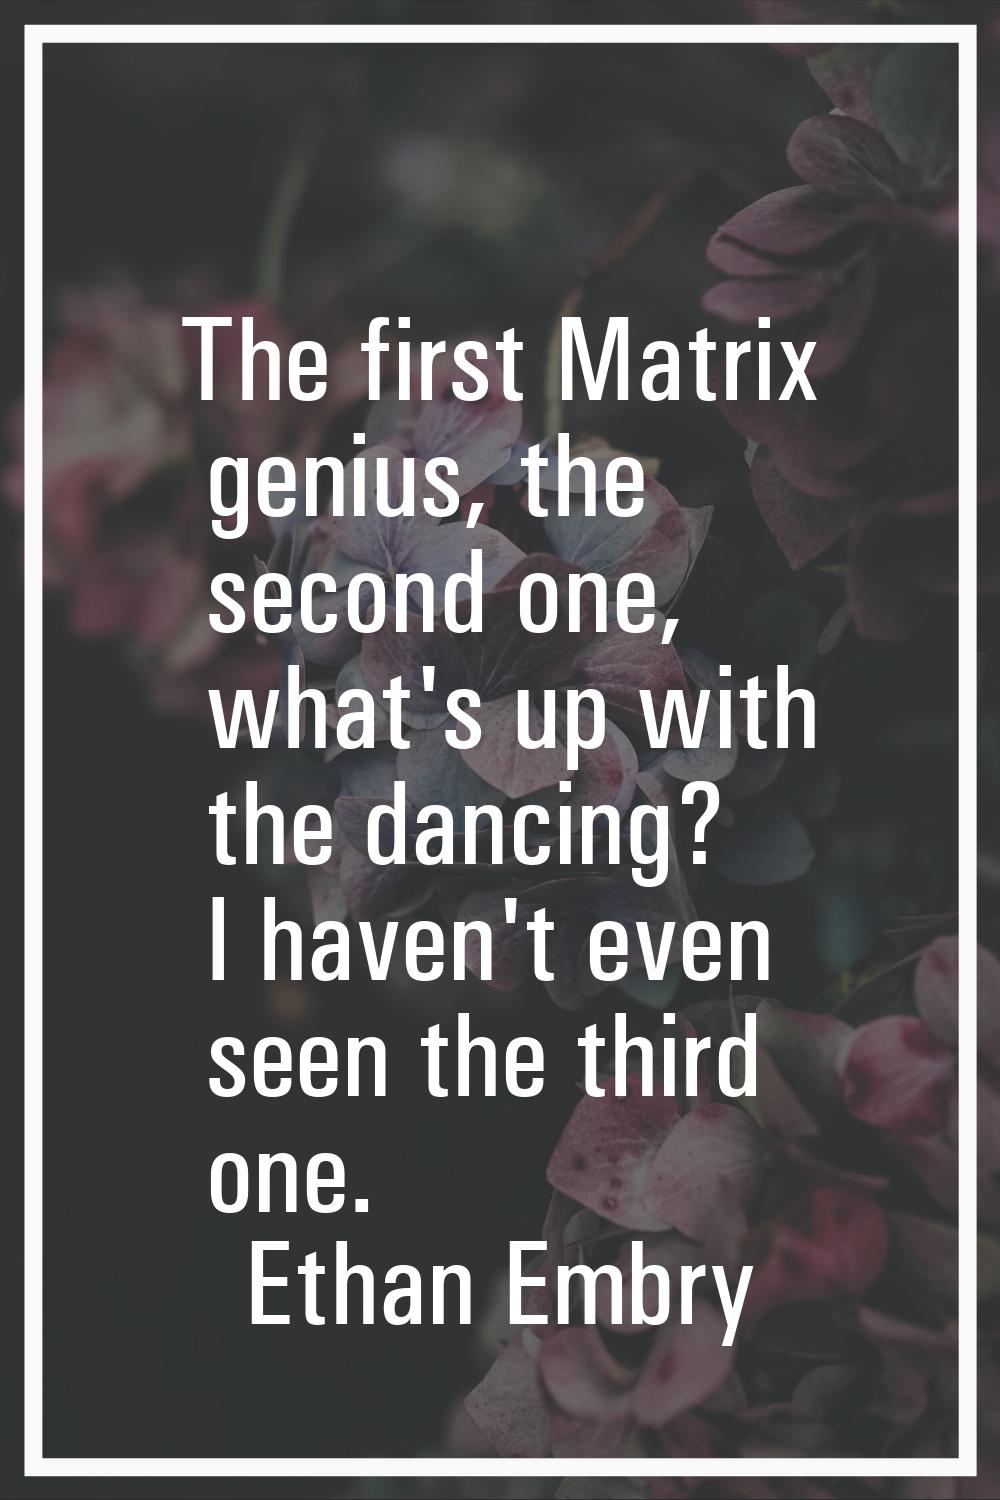 The first Matrix genius, the second one, what's up with the dancing? I haven't even seen the third 